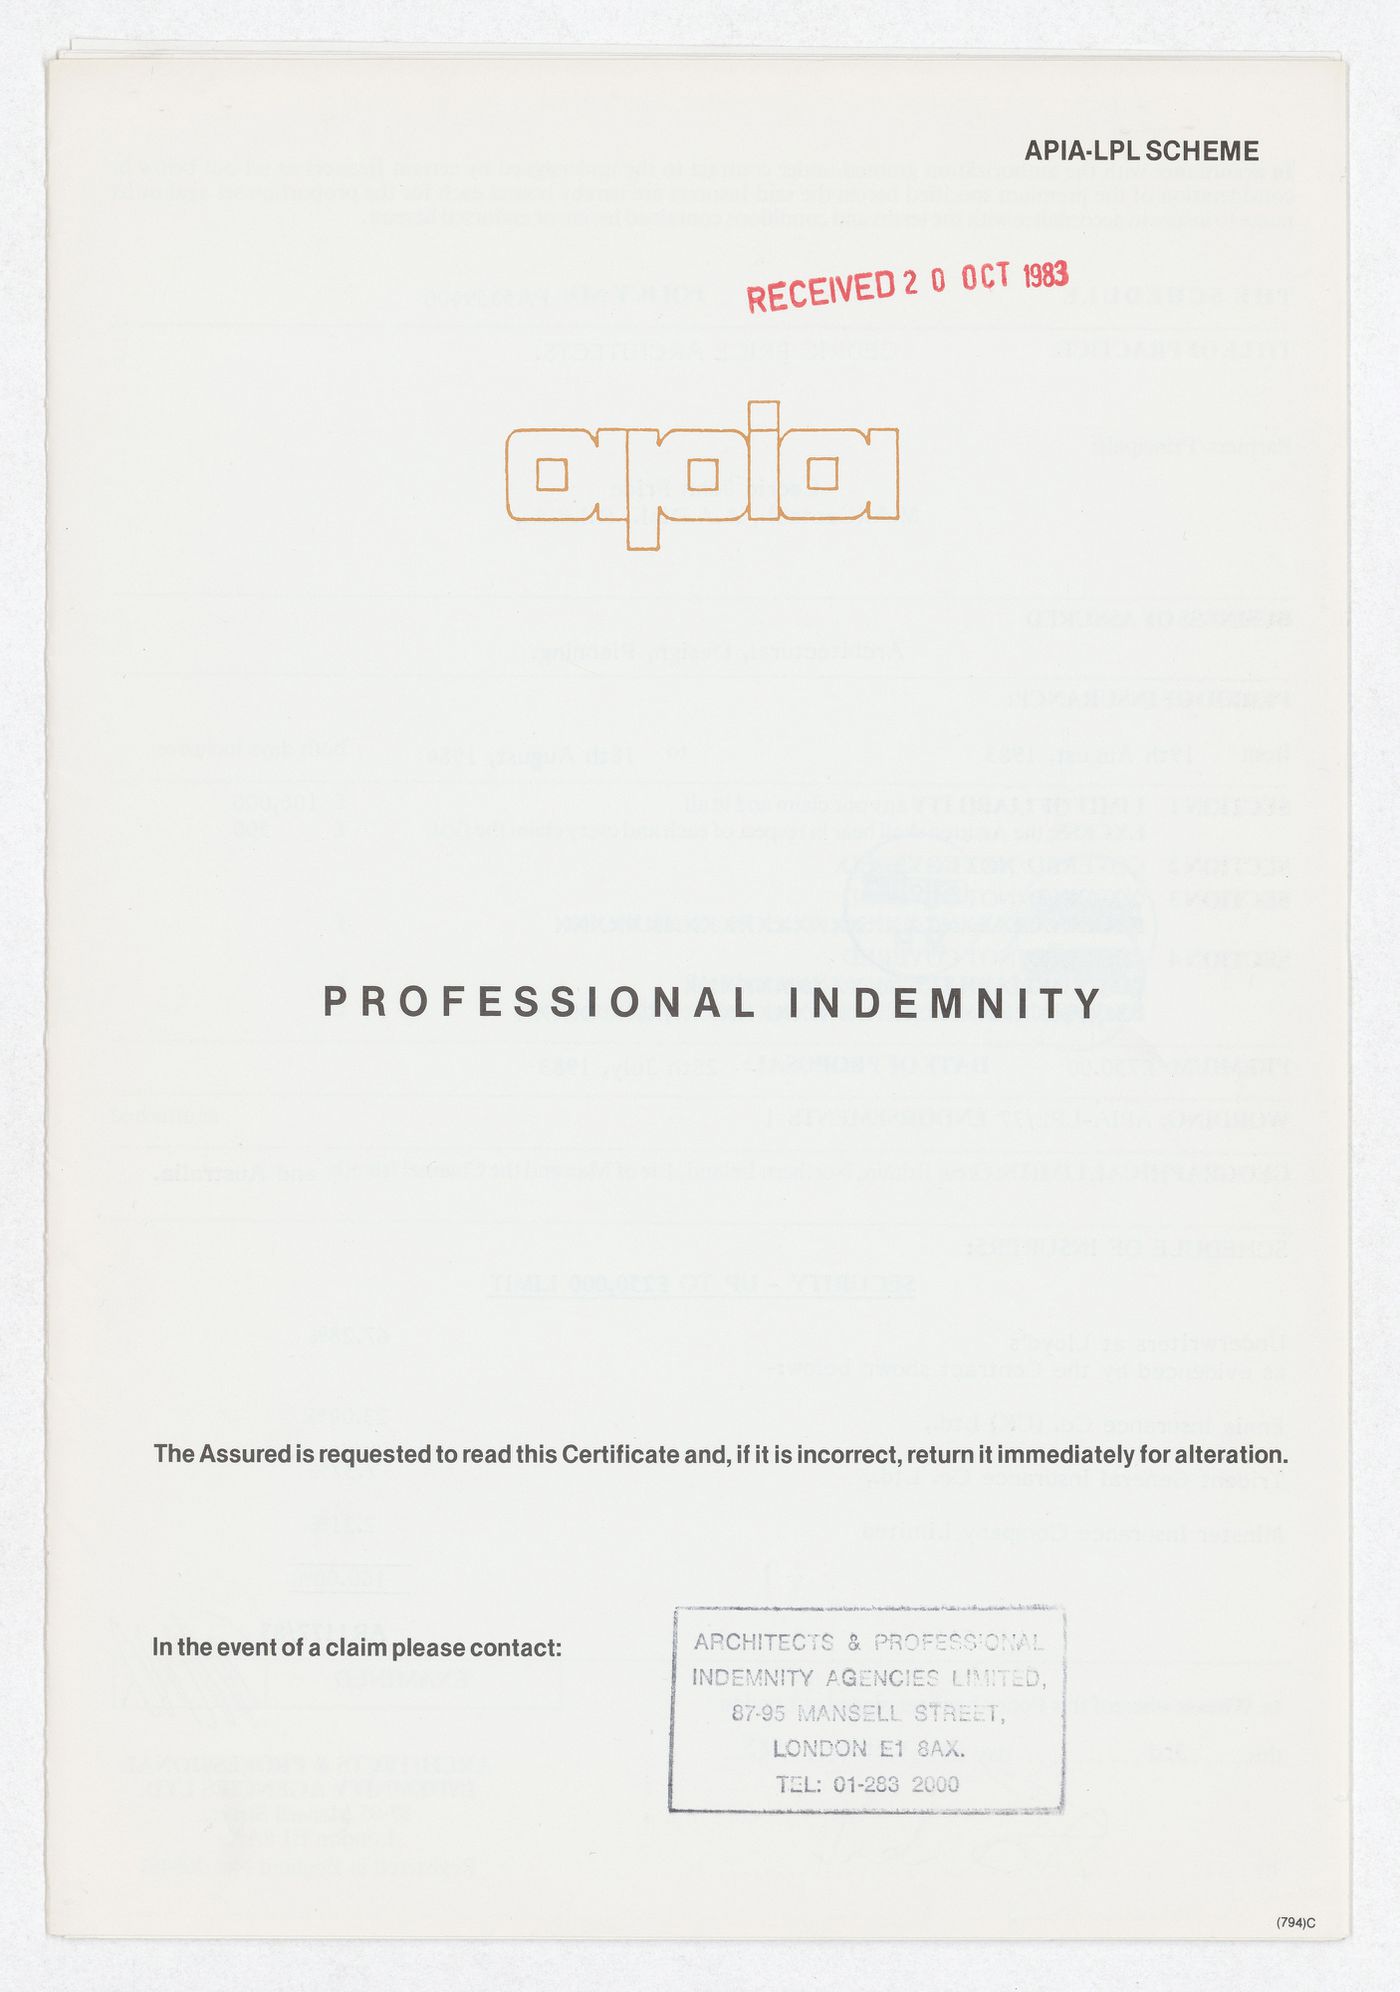 Professionnal indemnity insurance policy for Cedric Price Architects